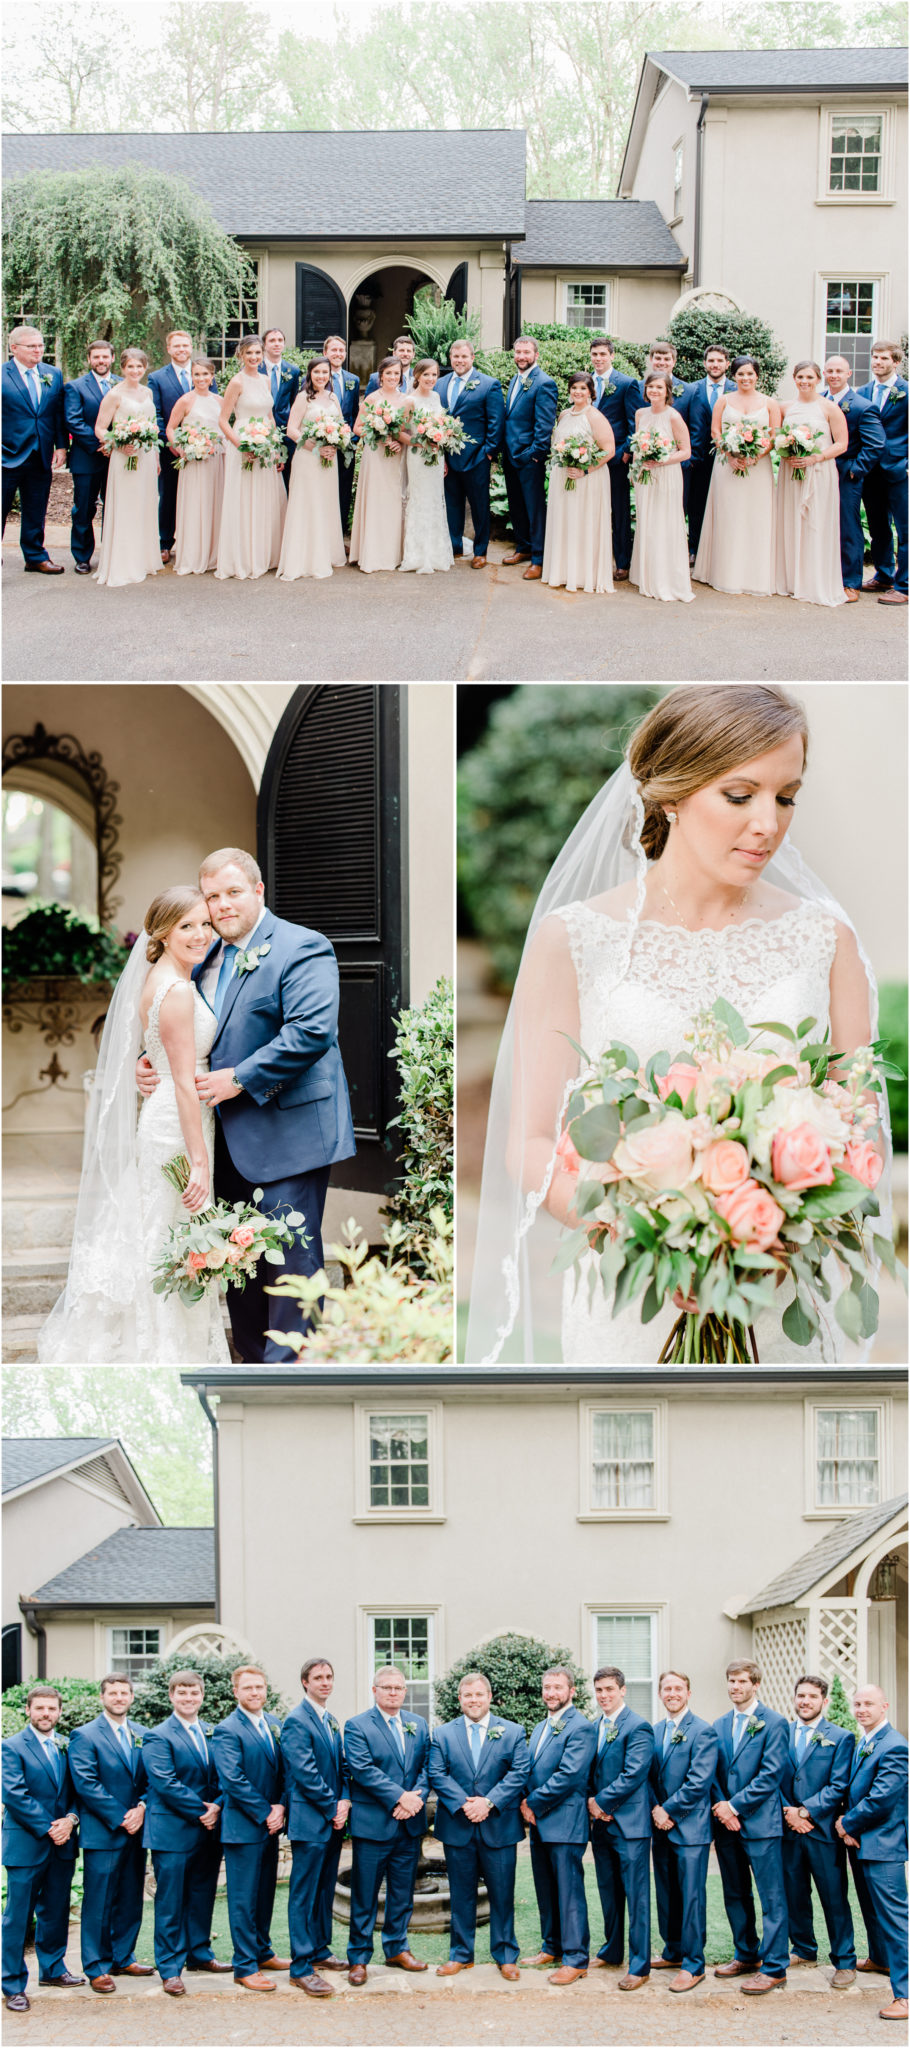 Lions Gate Manor wedding filled with blush navy and champagne accents